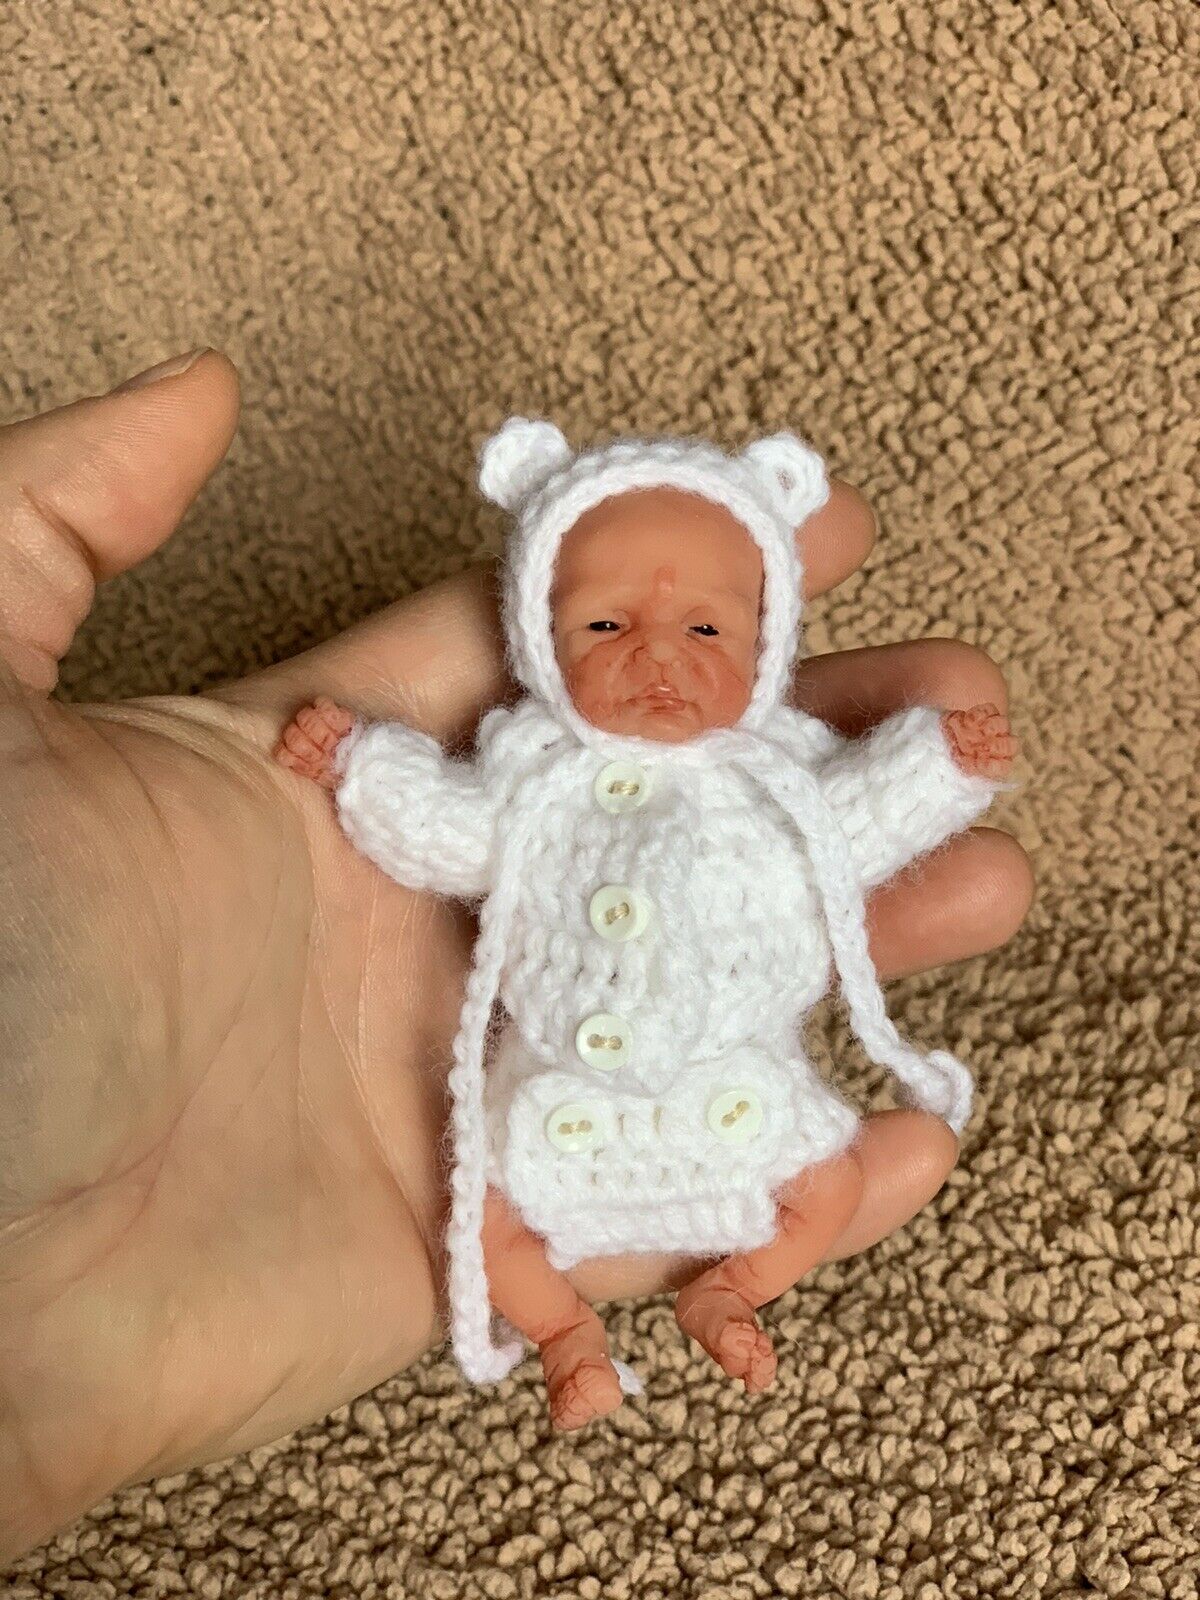 Handmade Crochet Outfit For 3-4 Inch Mini Ooak Preemie Reborn Silicone Baby Doll